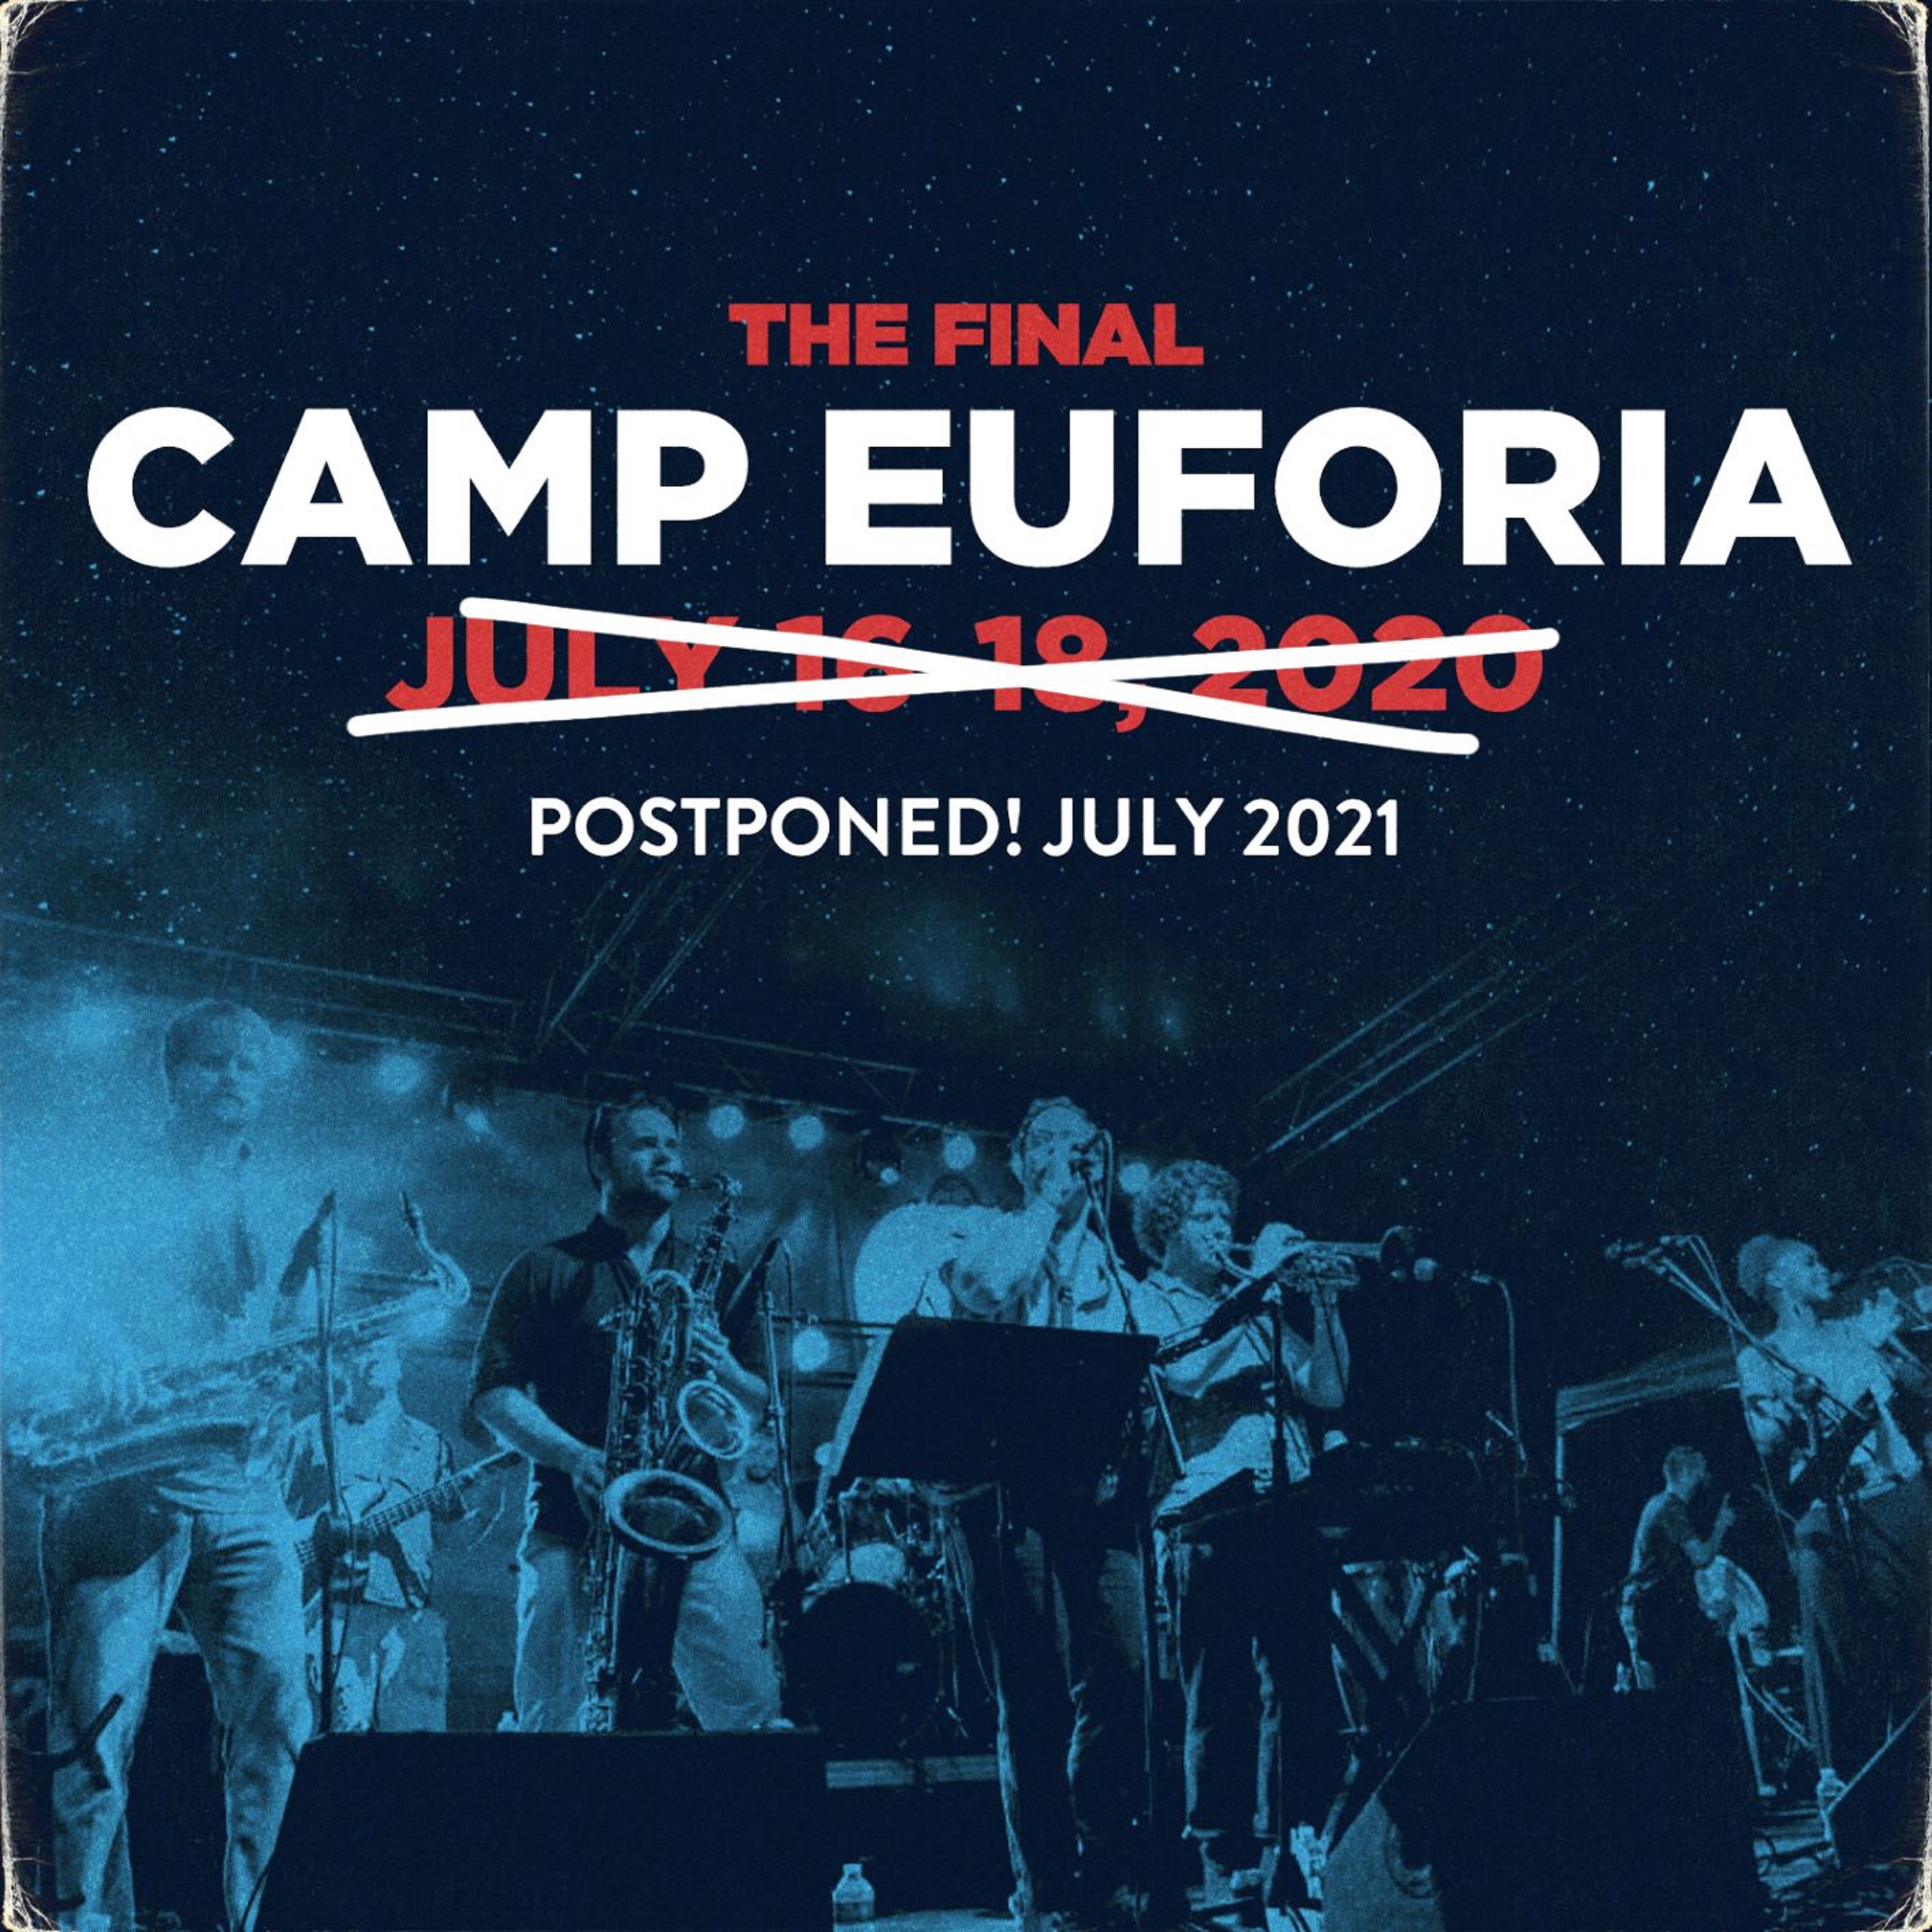 Camp Euforia Postpones Final Year and Looks to Raise Money for Artists